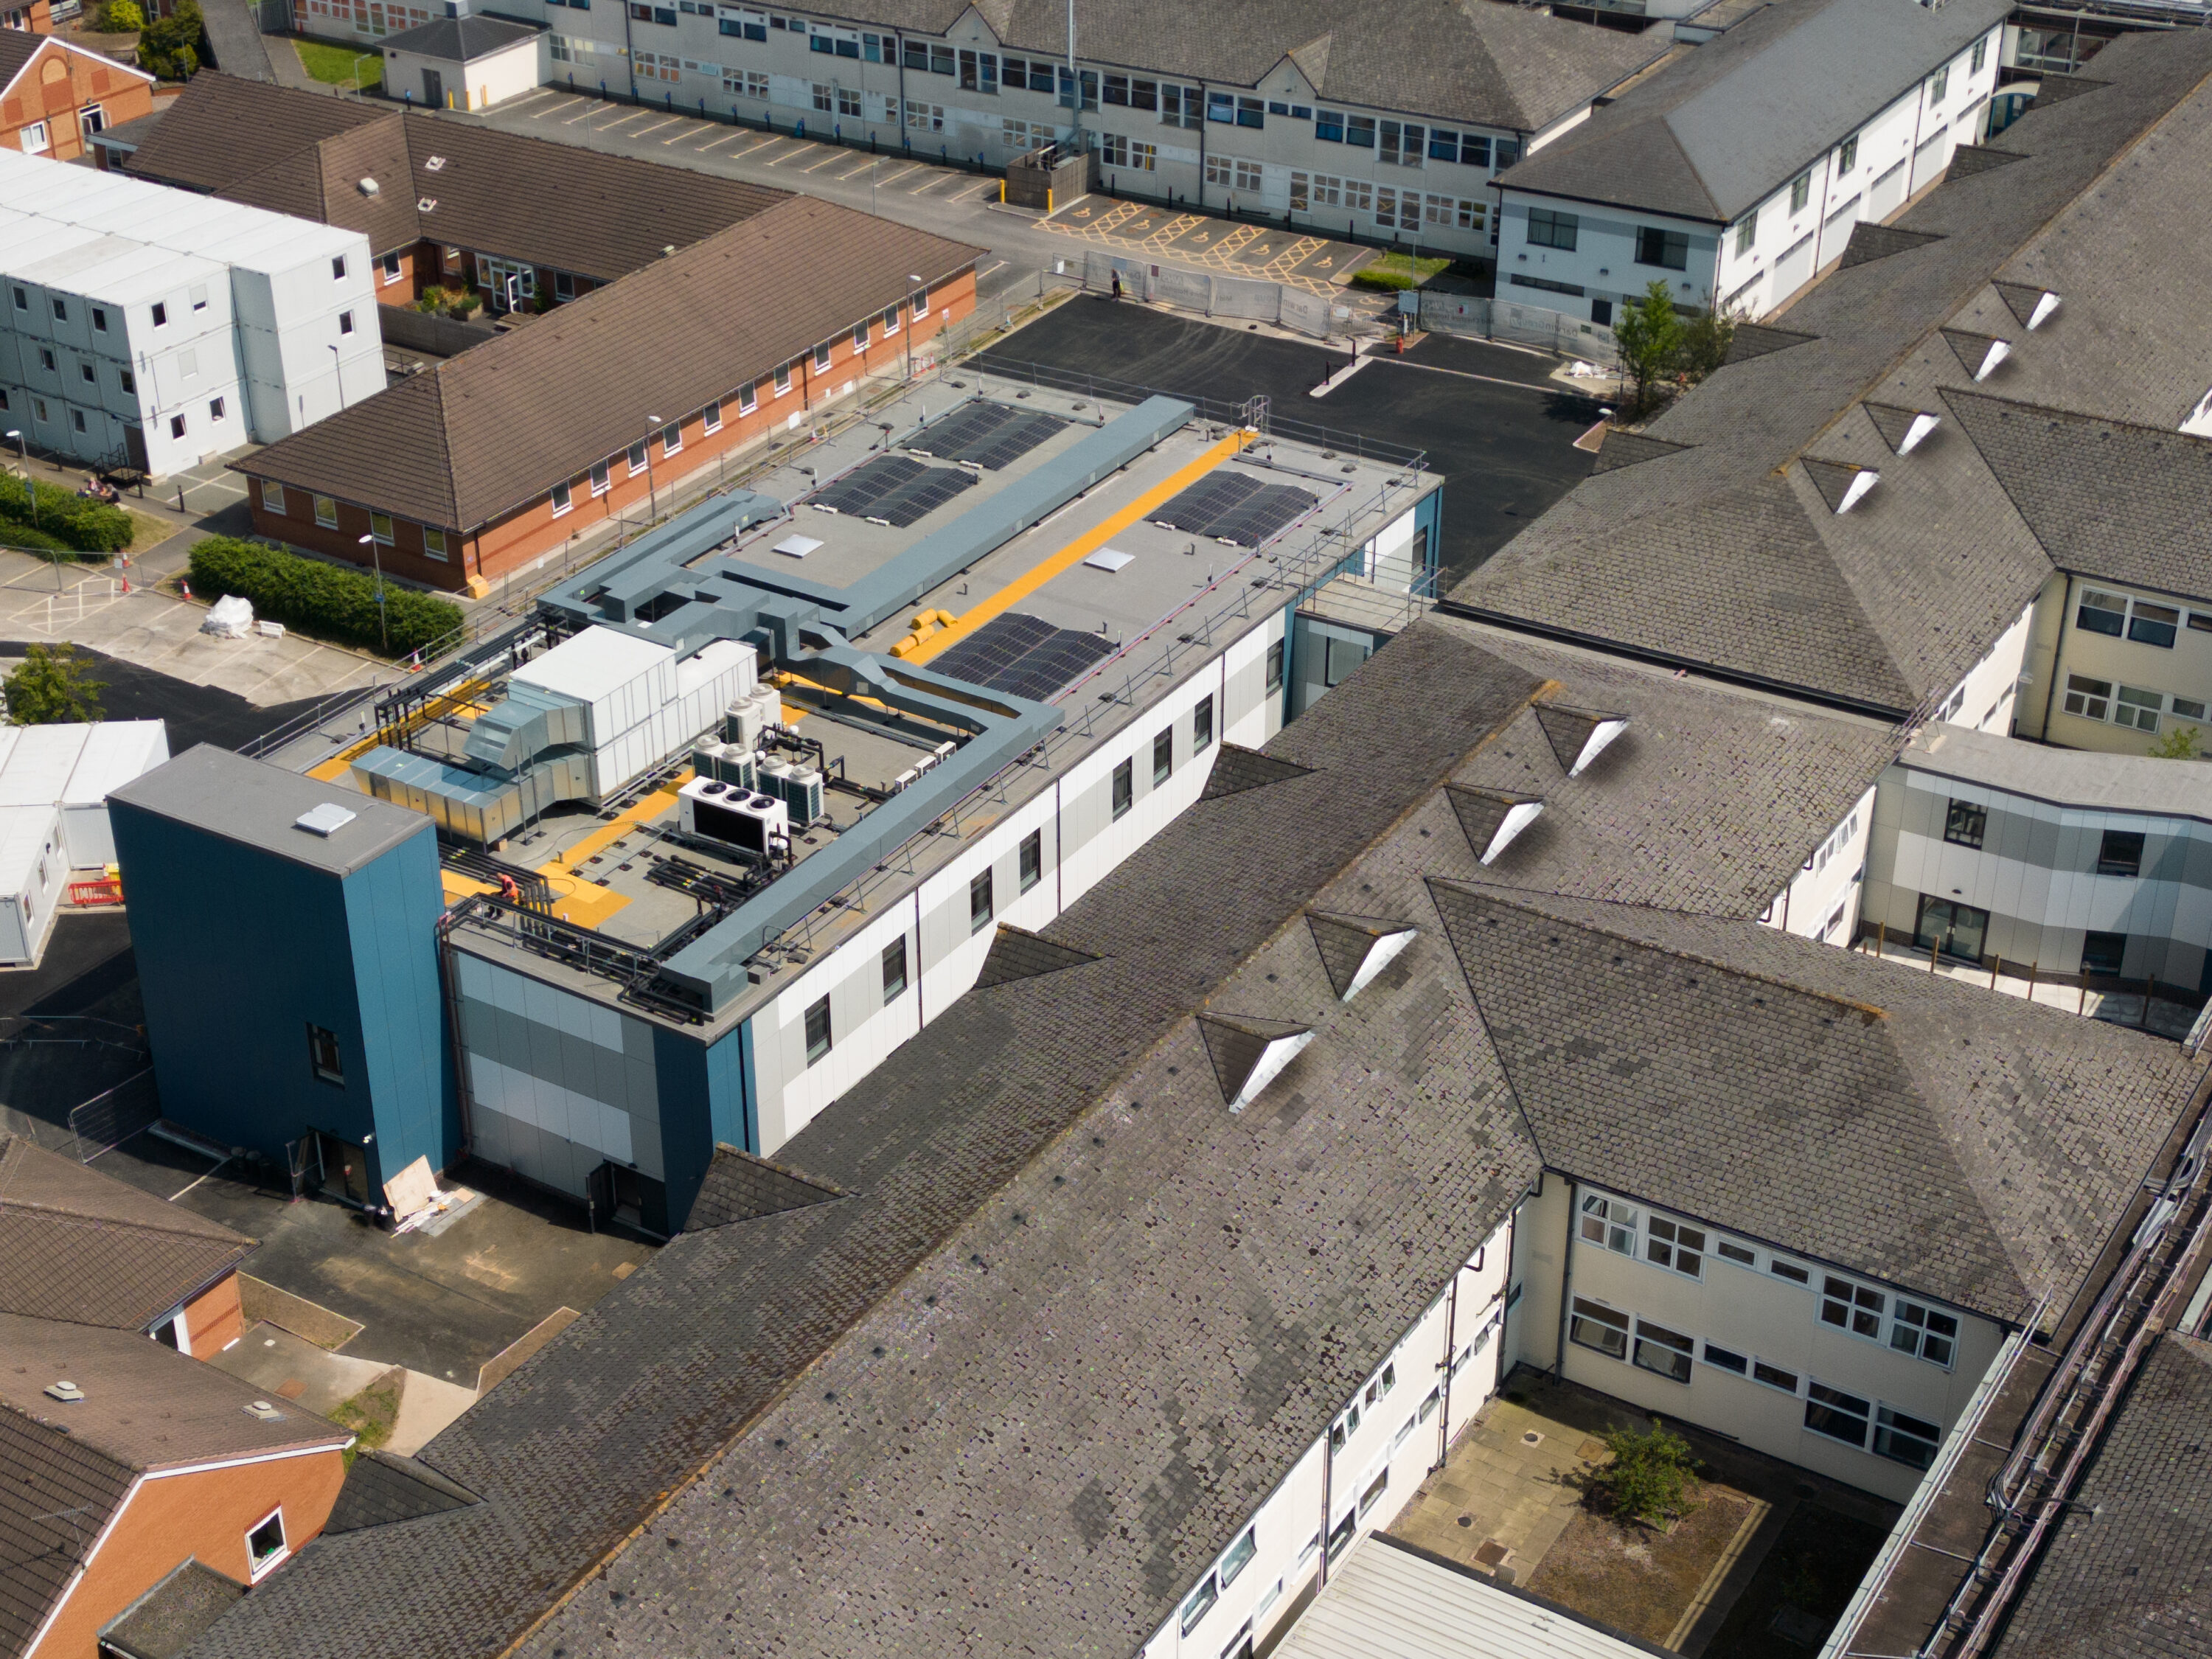 bird's eye view of the ward building amongst the older hospital buildings. You can see the plant and solar panel installation on the roof.